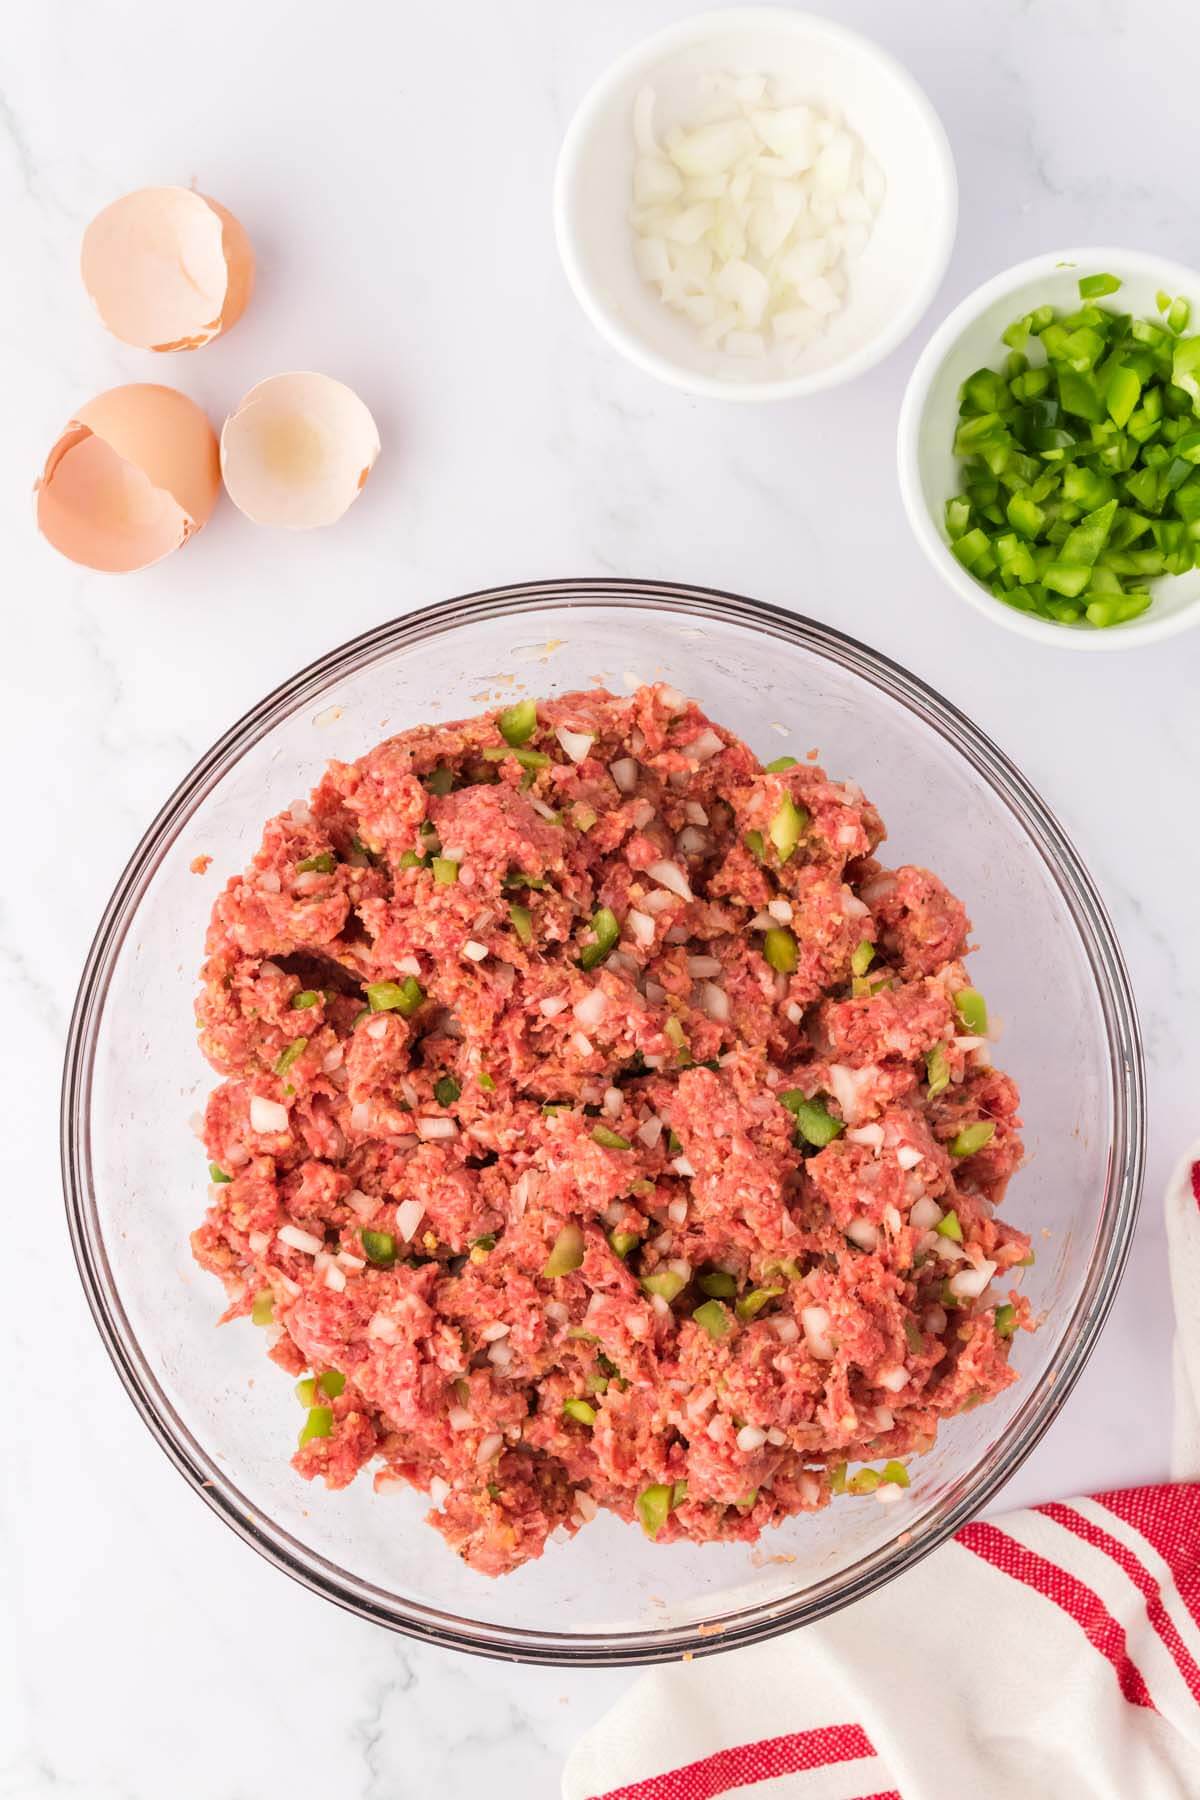 Ground hamburger meat in a bowl.